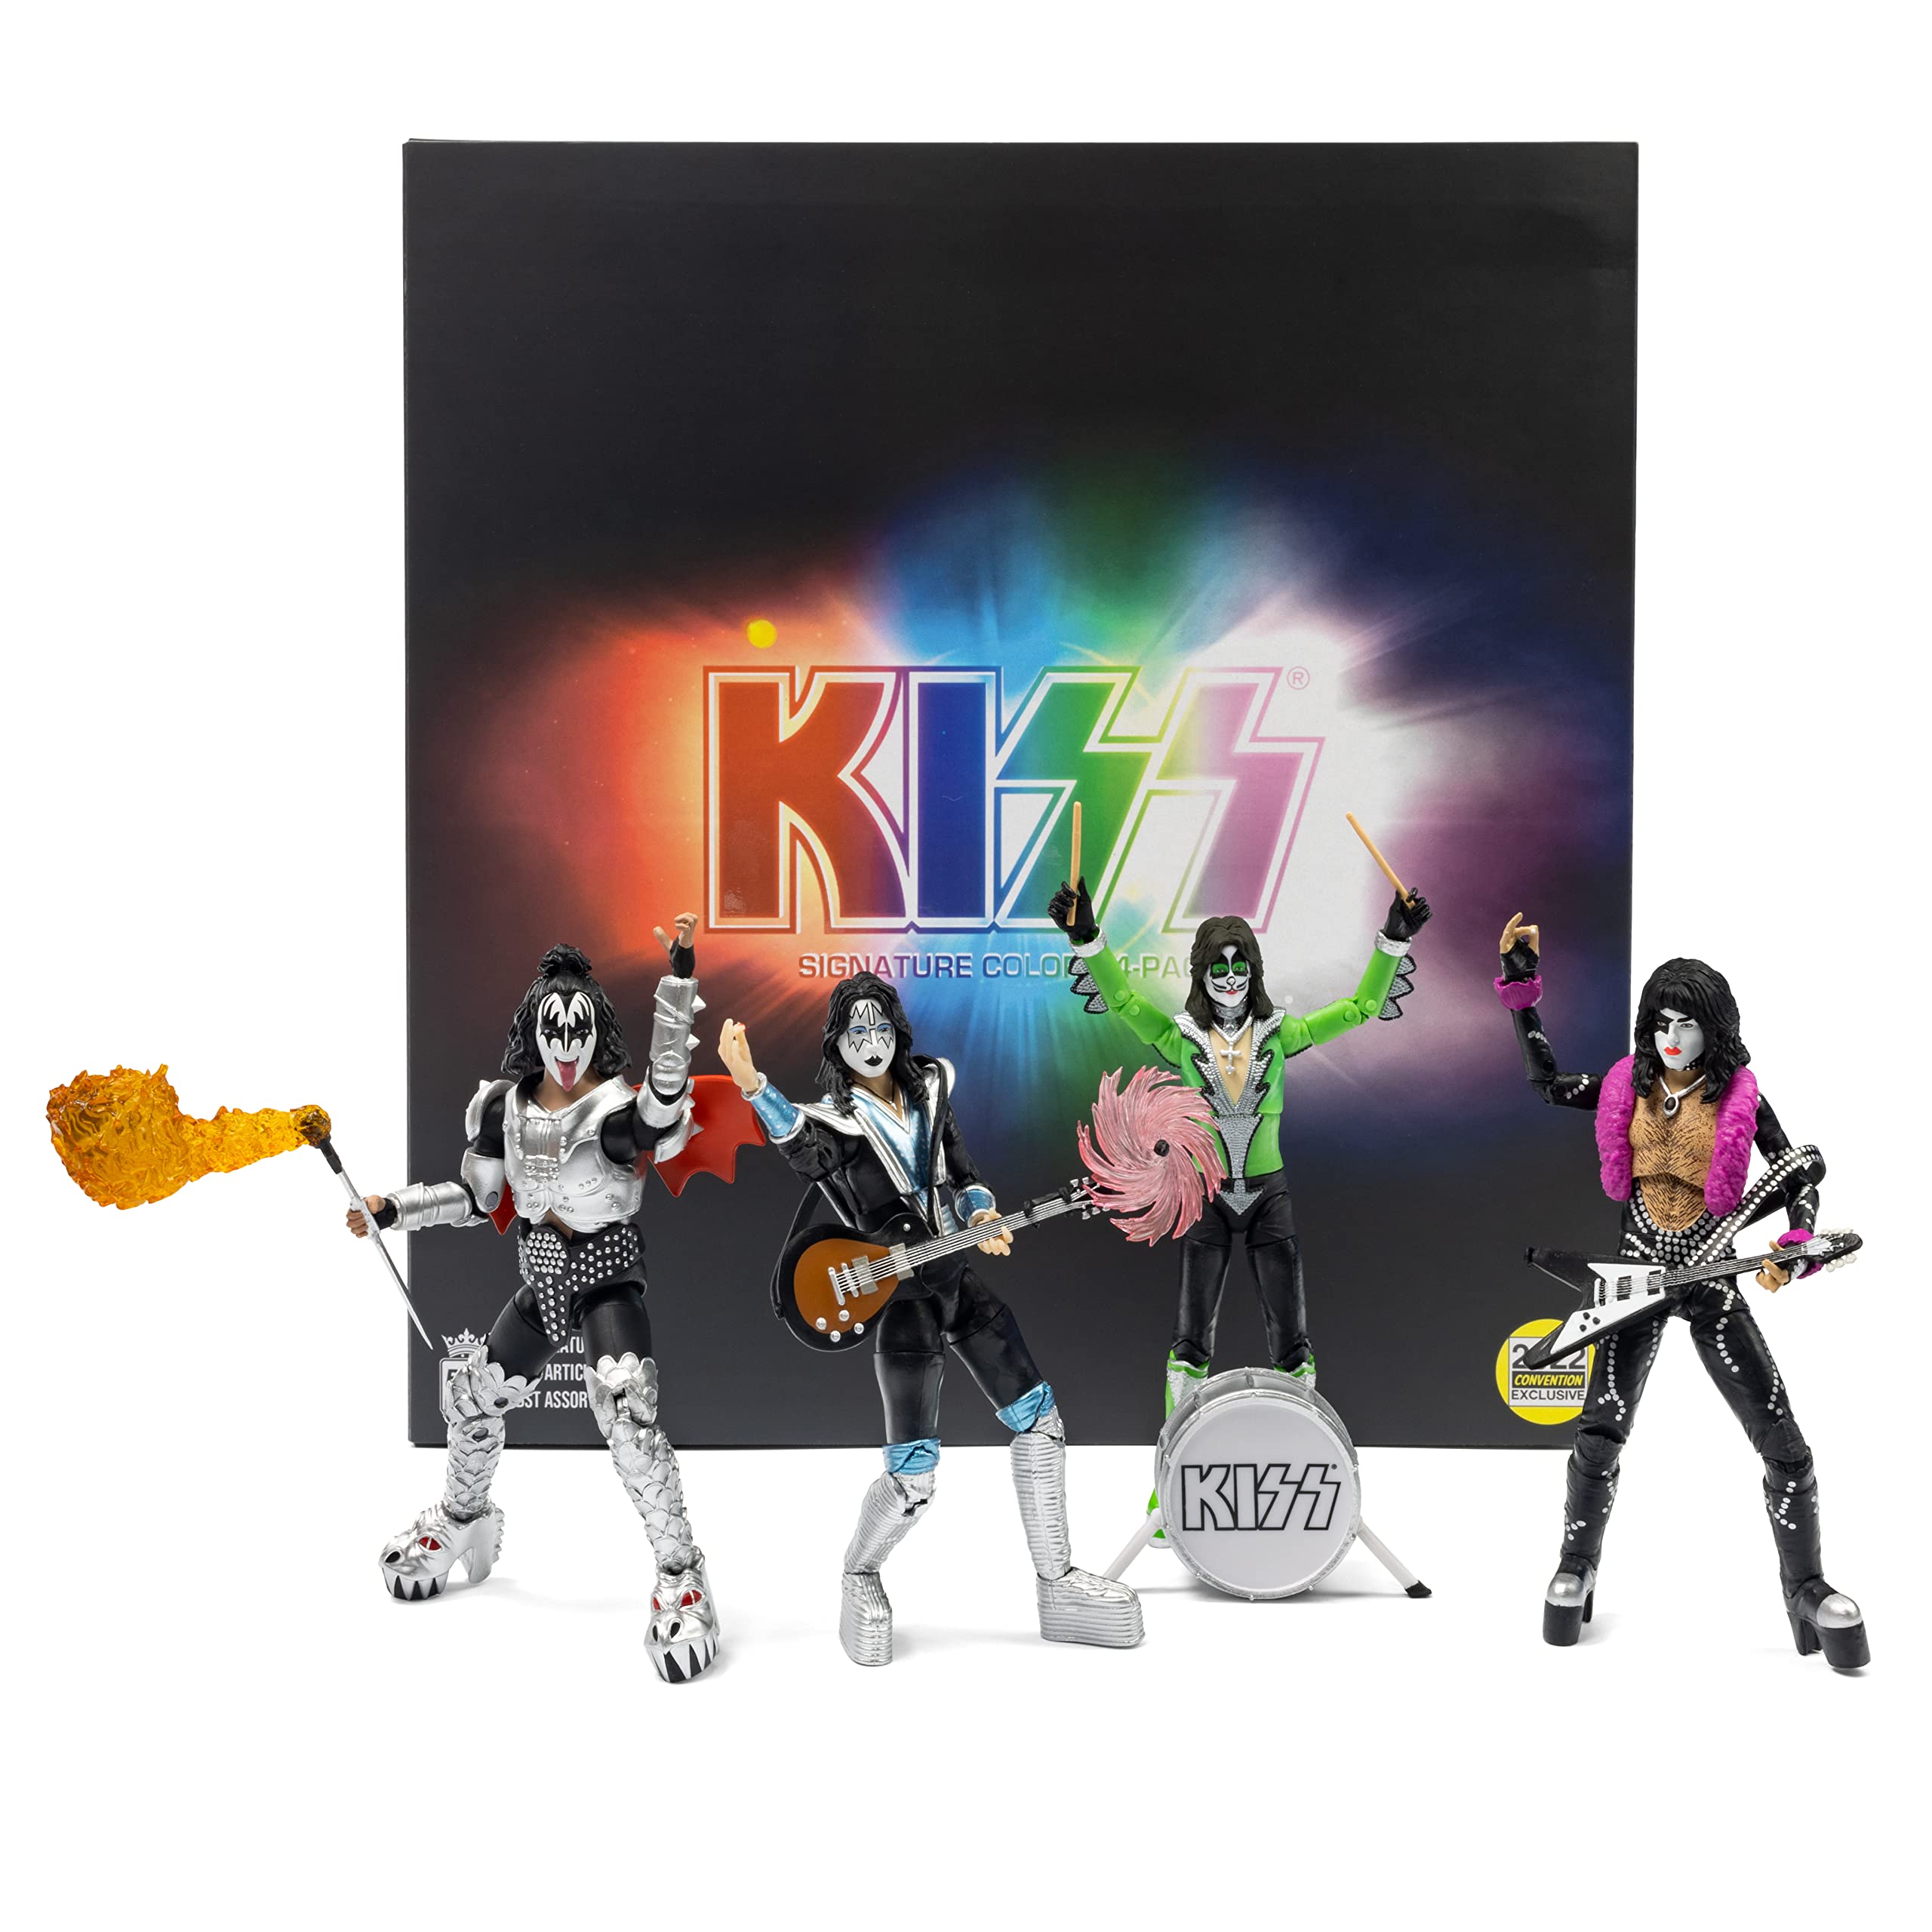 4-Pack 5'' The Loyal Subjects: KISS Band Action Figures w/ Instruments & Accessories (Signature Colors) $46.95 + Free Shipping